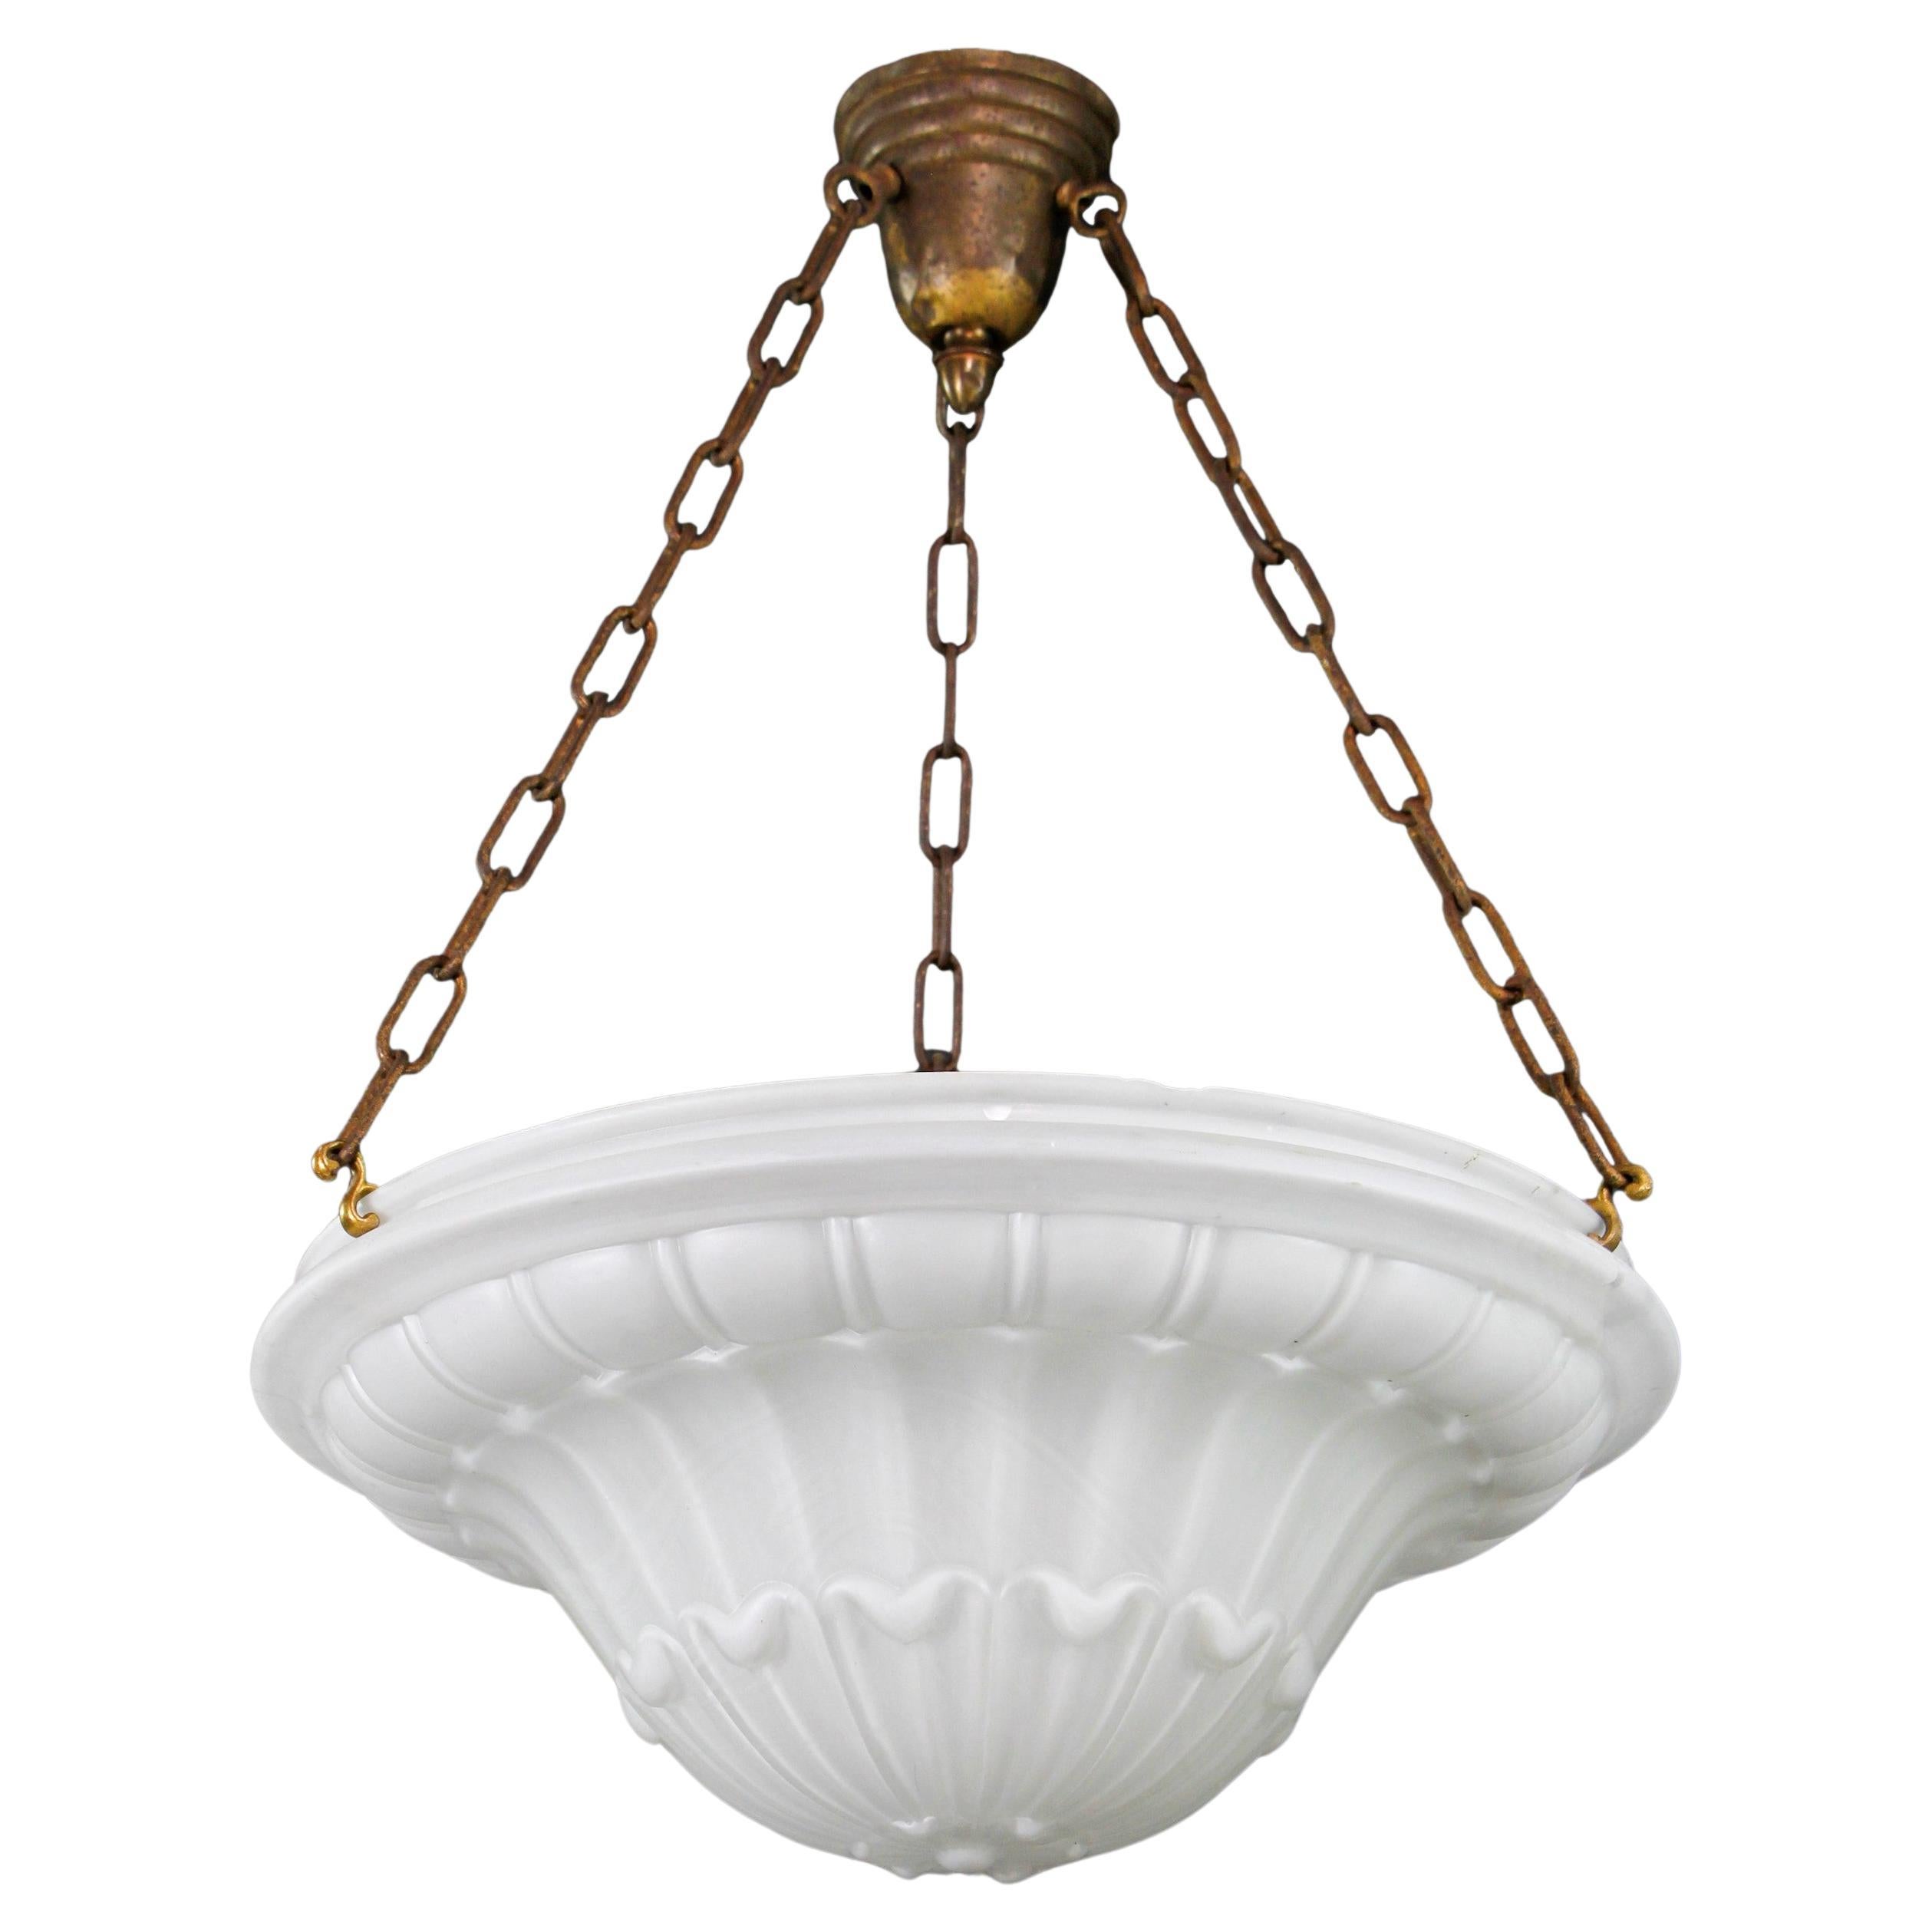 Early White Glass Dish Light Pendant Steel Chains Brass Canopy